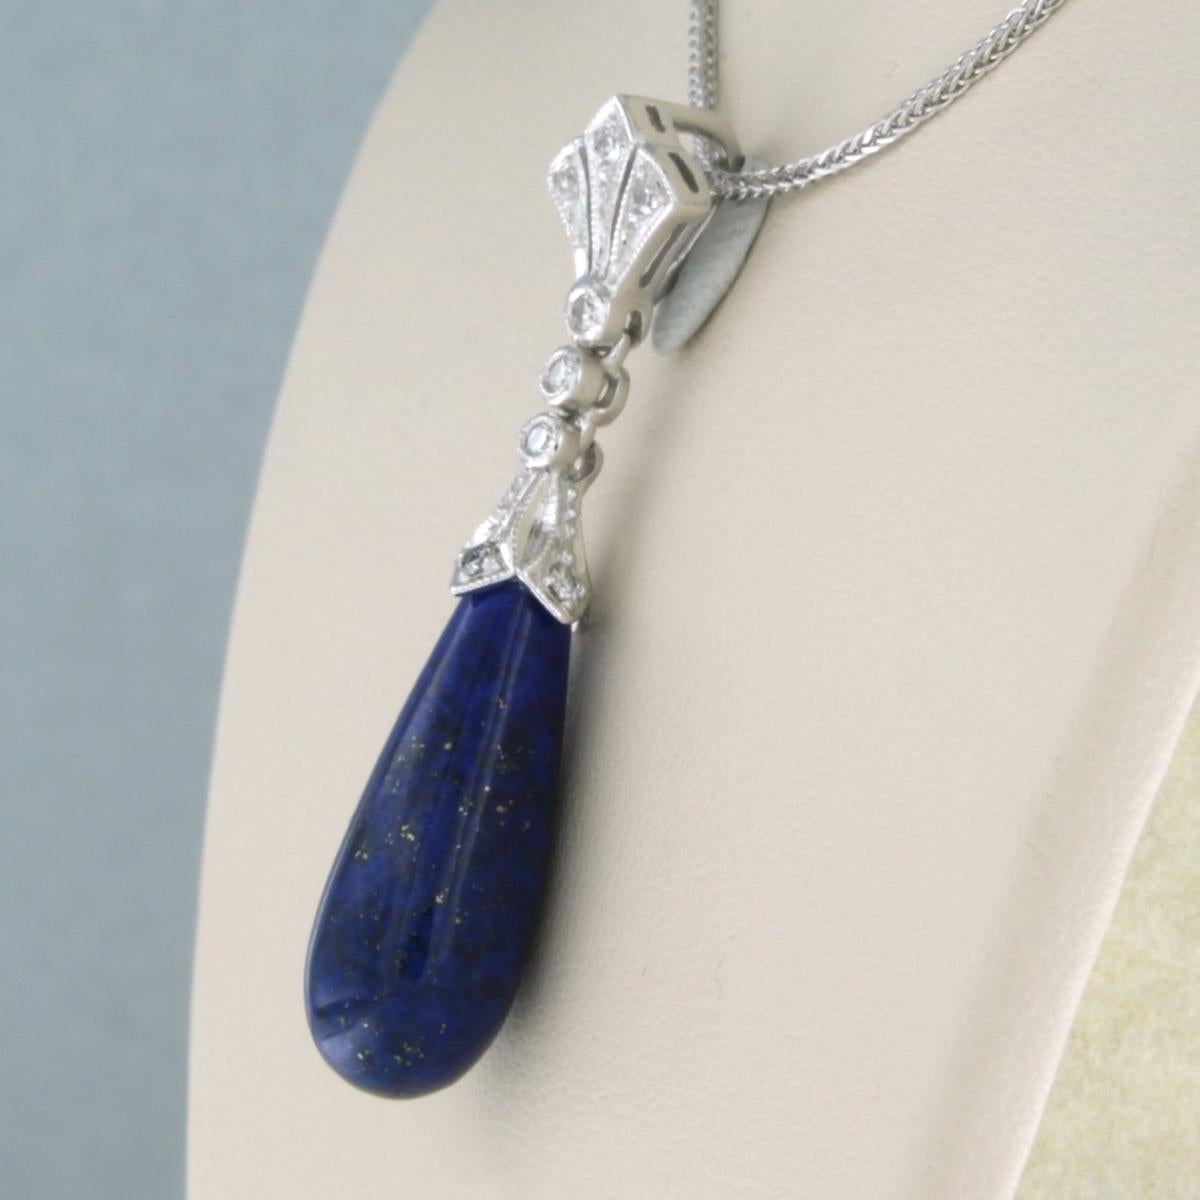 Women's Necklace and pendant with lapis lazuli and diamonds 14k white gold For Sale